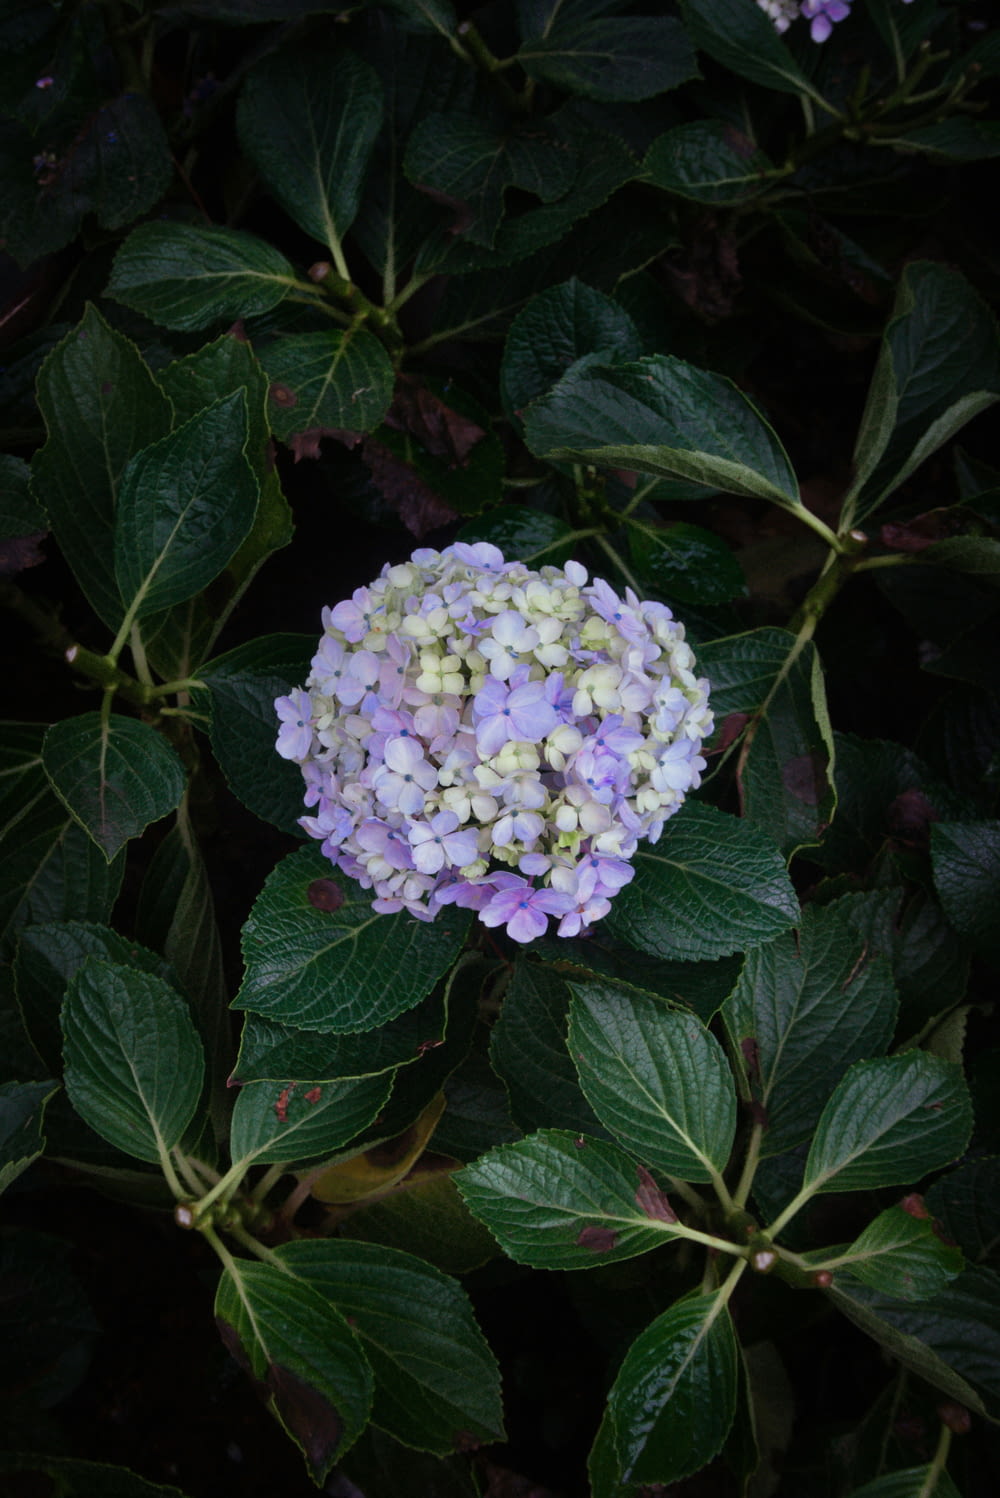 a purple and white flower surrounded by green leaves